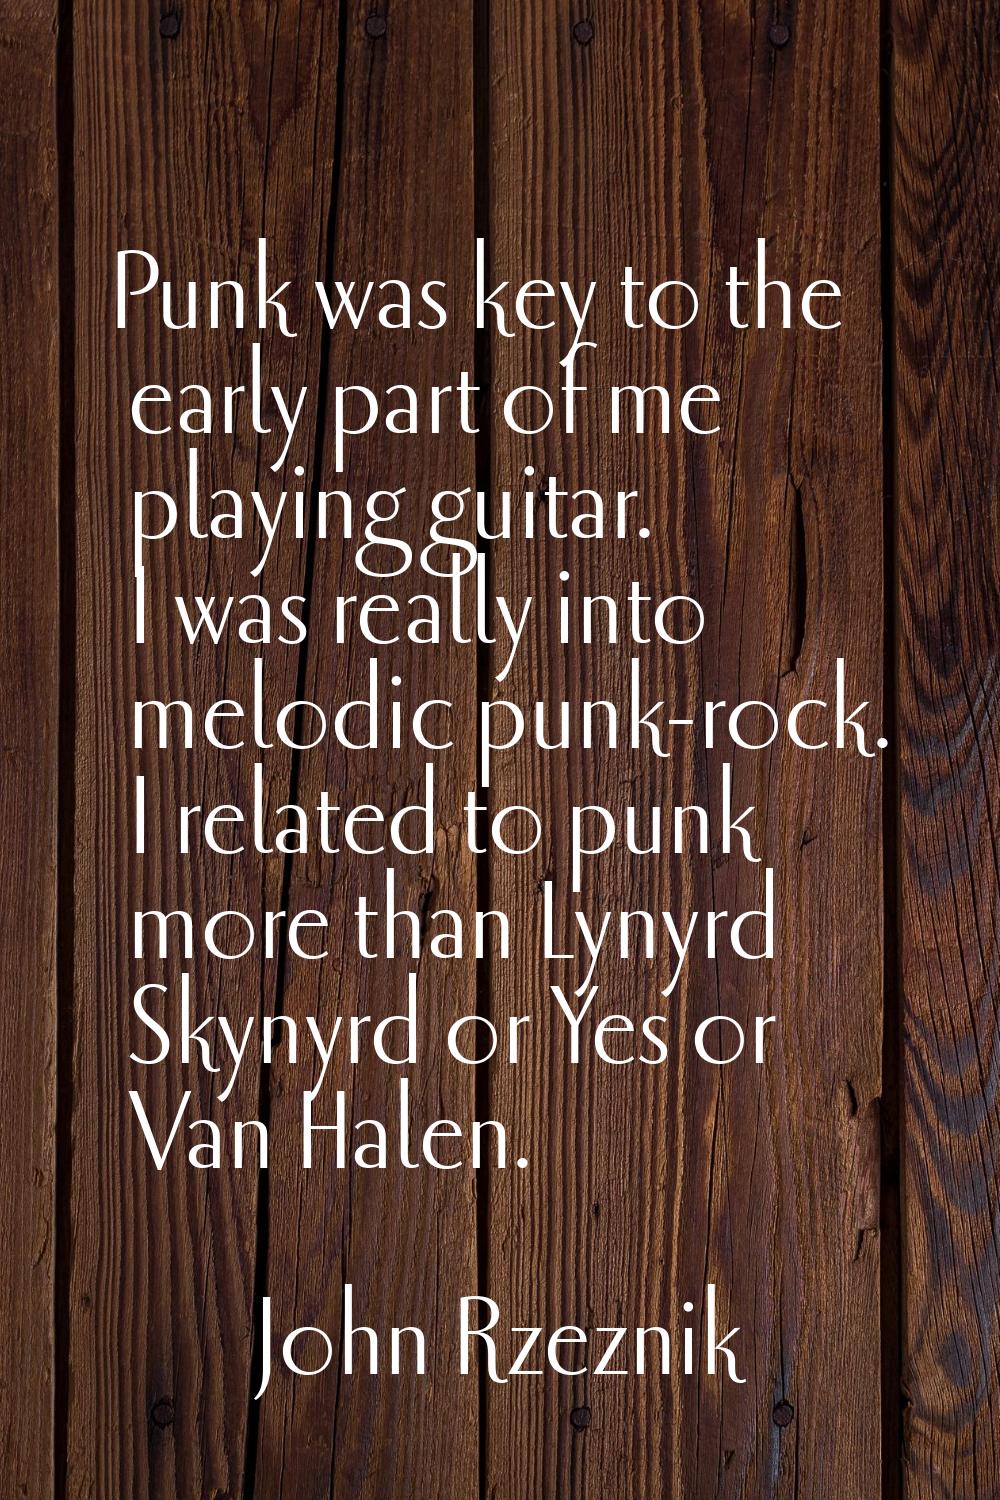 Punk was key to the early part of me playing guitar. I was really into melodic punk-rock. I related